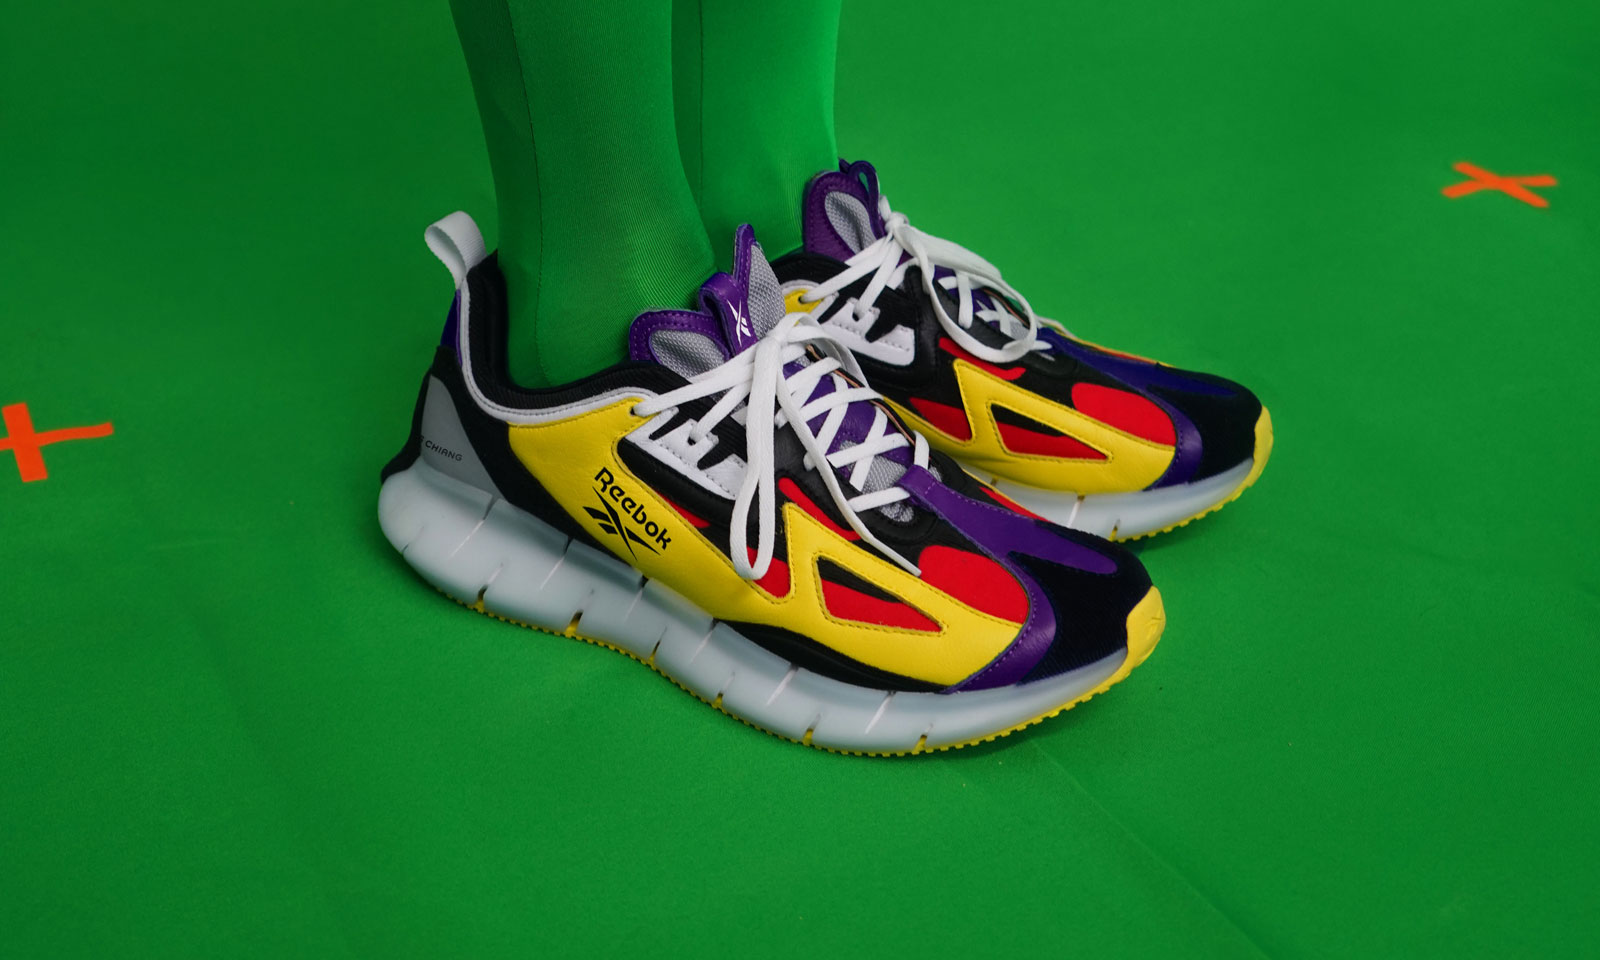 Angus Chiang and Reebok play with bold colors